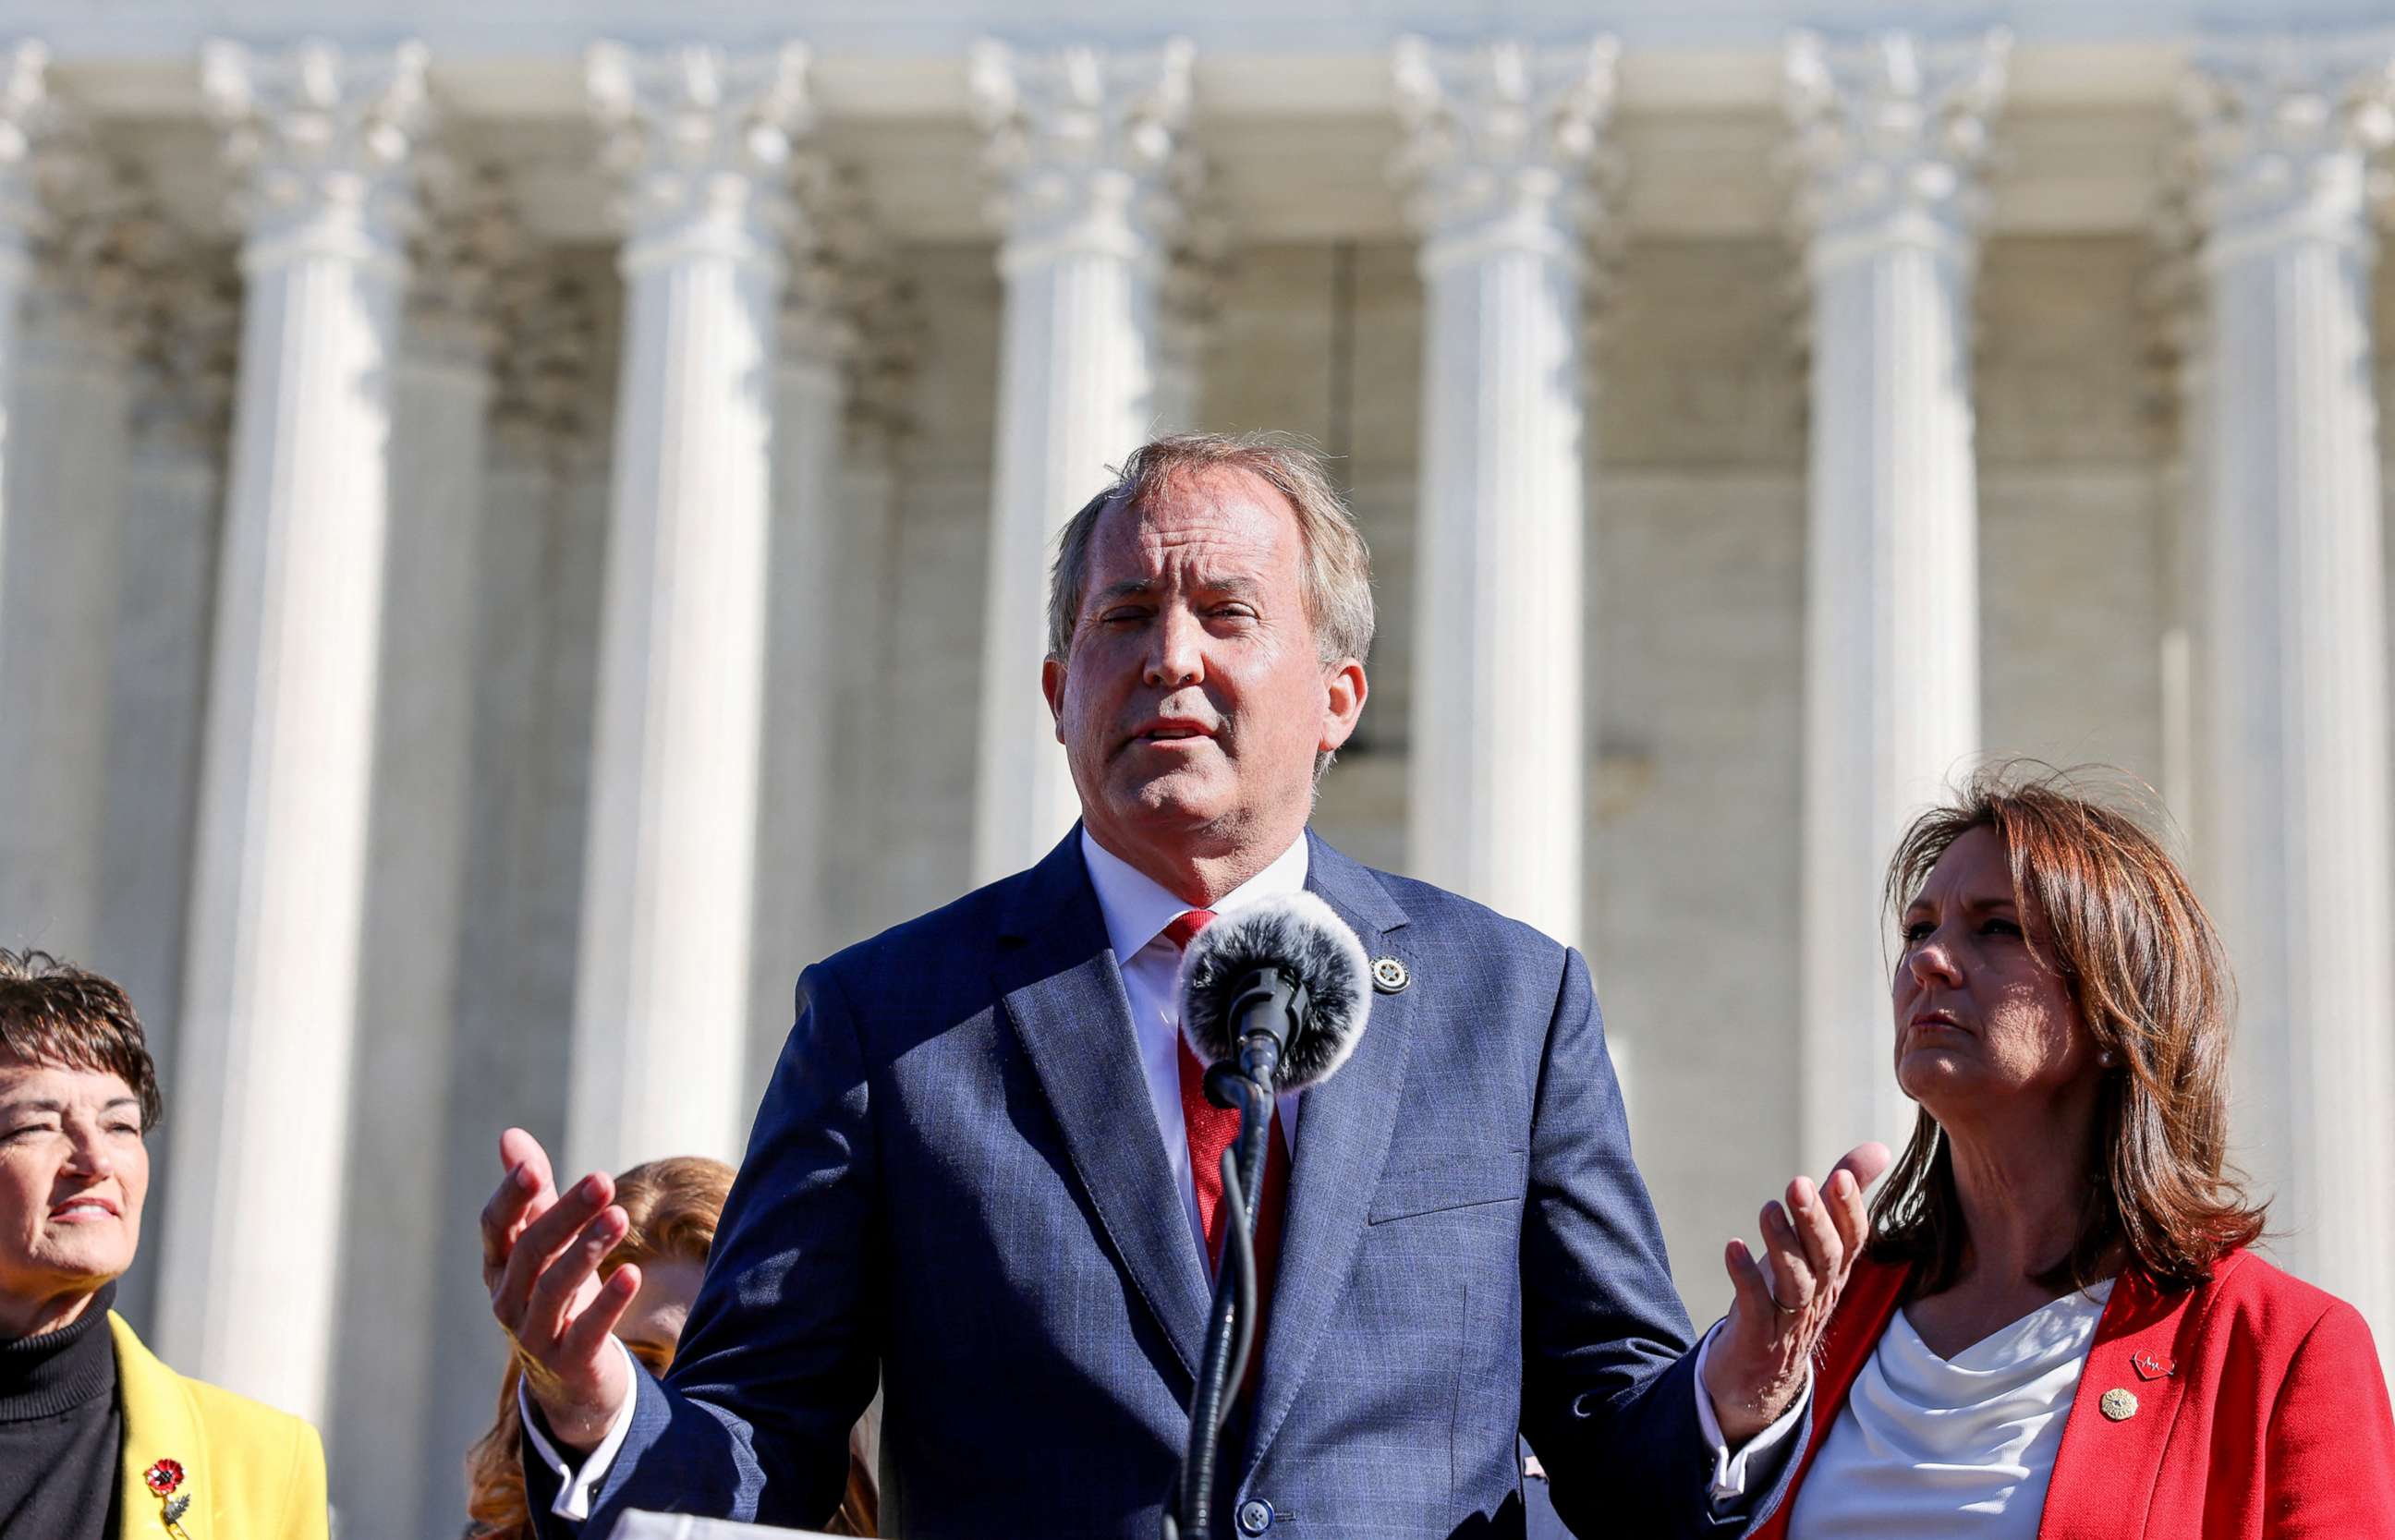 PHOTO: Texas Attorney General Ken Paxton speaks to anti-abortion supporters outside the U.S. Supreme Court, Nov. 1, 2021, in Washington, D.C.